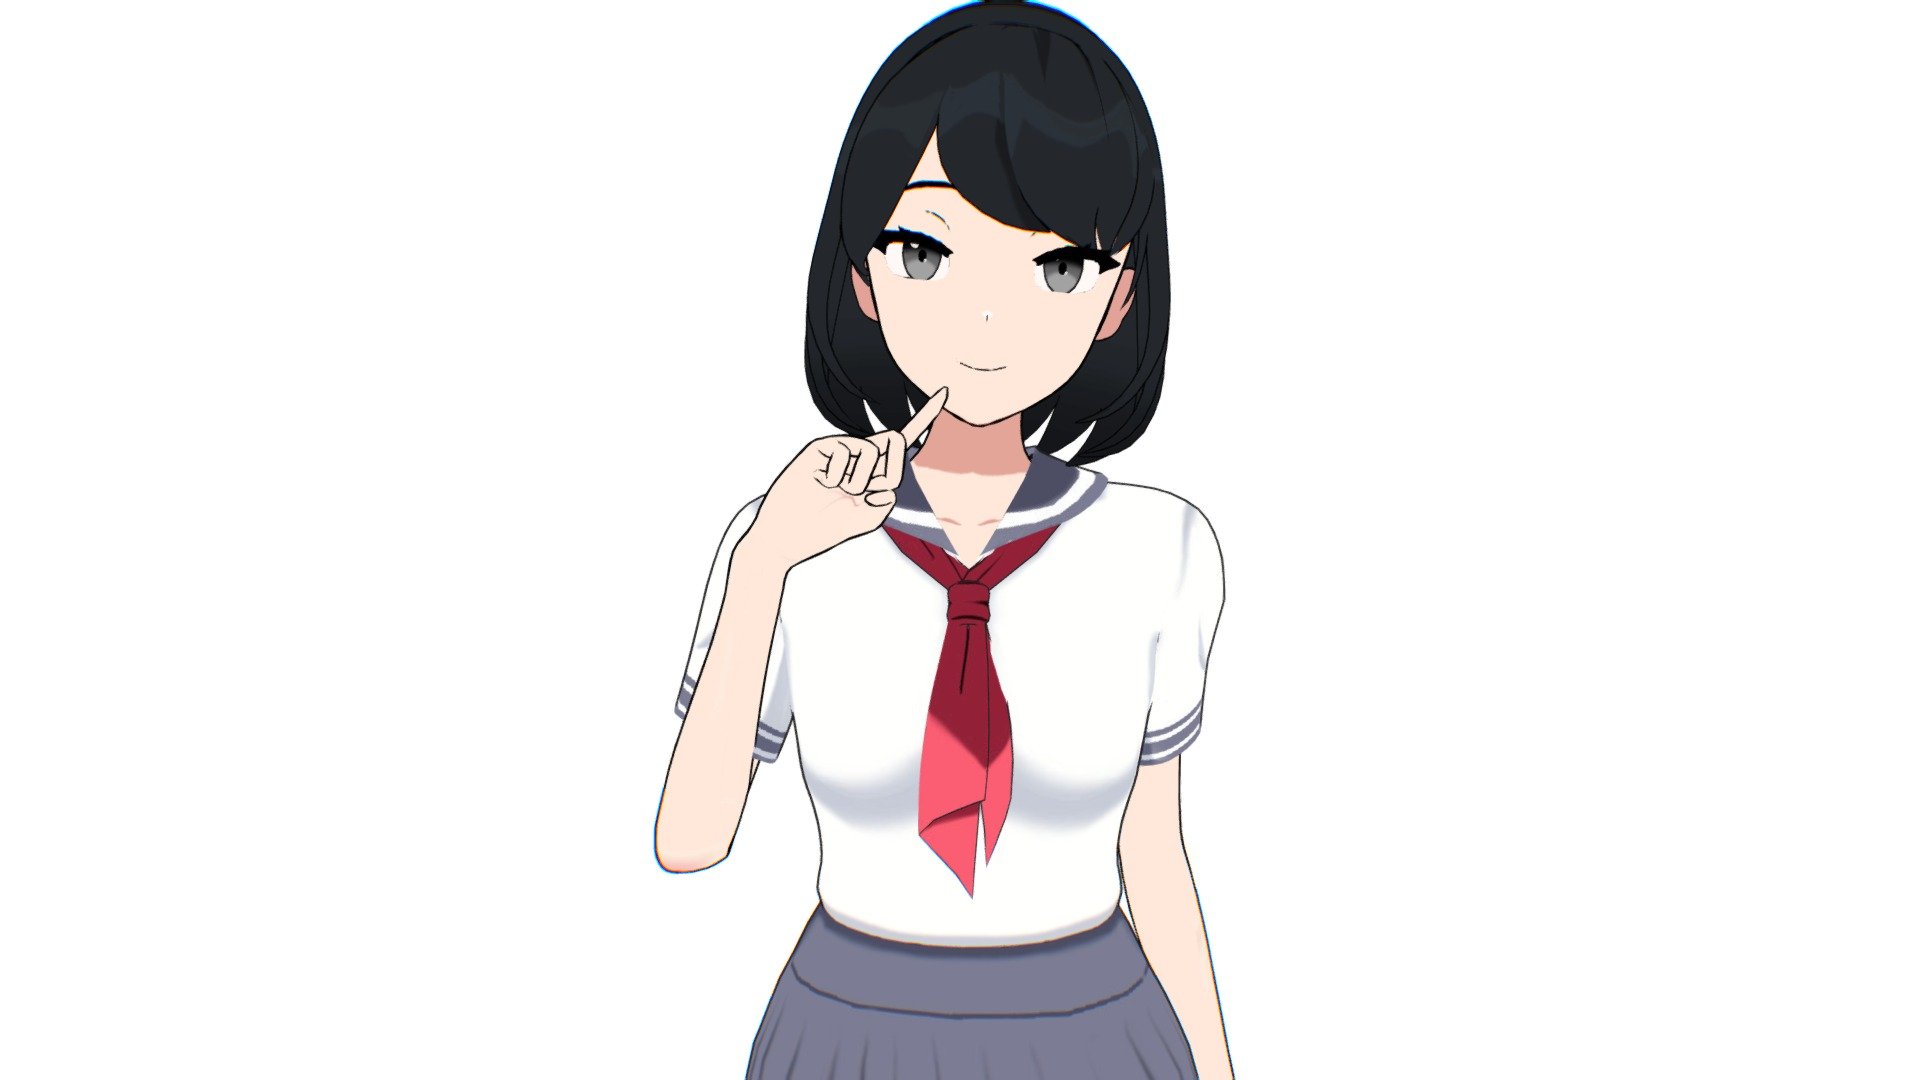 “I’m a studious anime girl who loves to learn new things. I always have my nose buried in a book, and I love to wear cute school uniforms. My favorite subjects are math and science, and I always strive to do my best in class. When I’m not studying, you can find me practicing my music or hanging out with my friends.”

Contains:




.Blend (Blender 3.3)

.Textures

.Rigged (Auto rig pro)

VIDEO DEMO - Blender

Anime girl - Student - 1

Anime girl - Student - 2

Anime girl - Student - 3

Anime girl - Student - 5

All girls


 - Anime girl - Student - 4 - Buy Royalty Free 3D model by LessaB3D 3d model